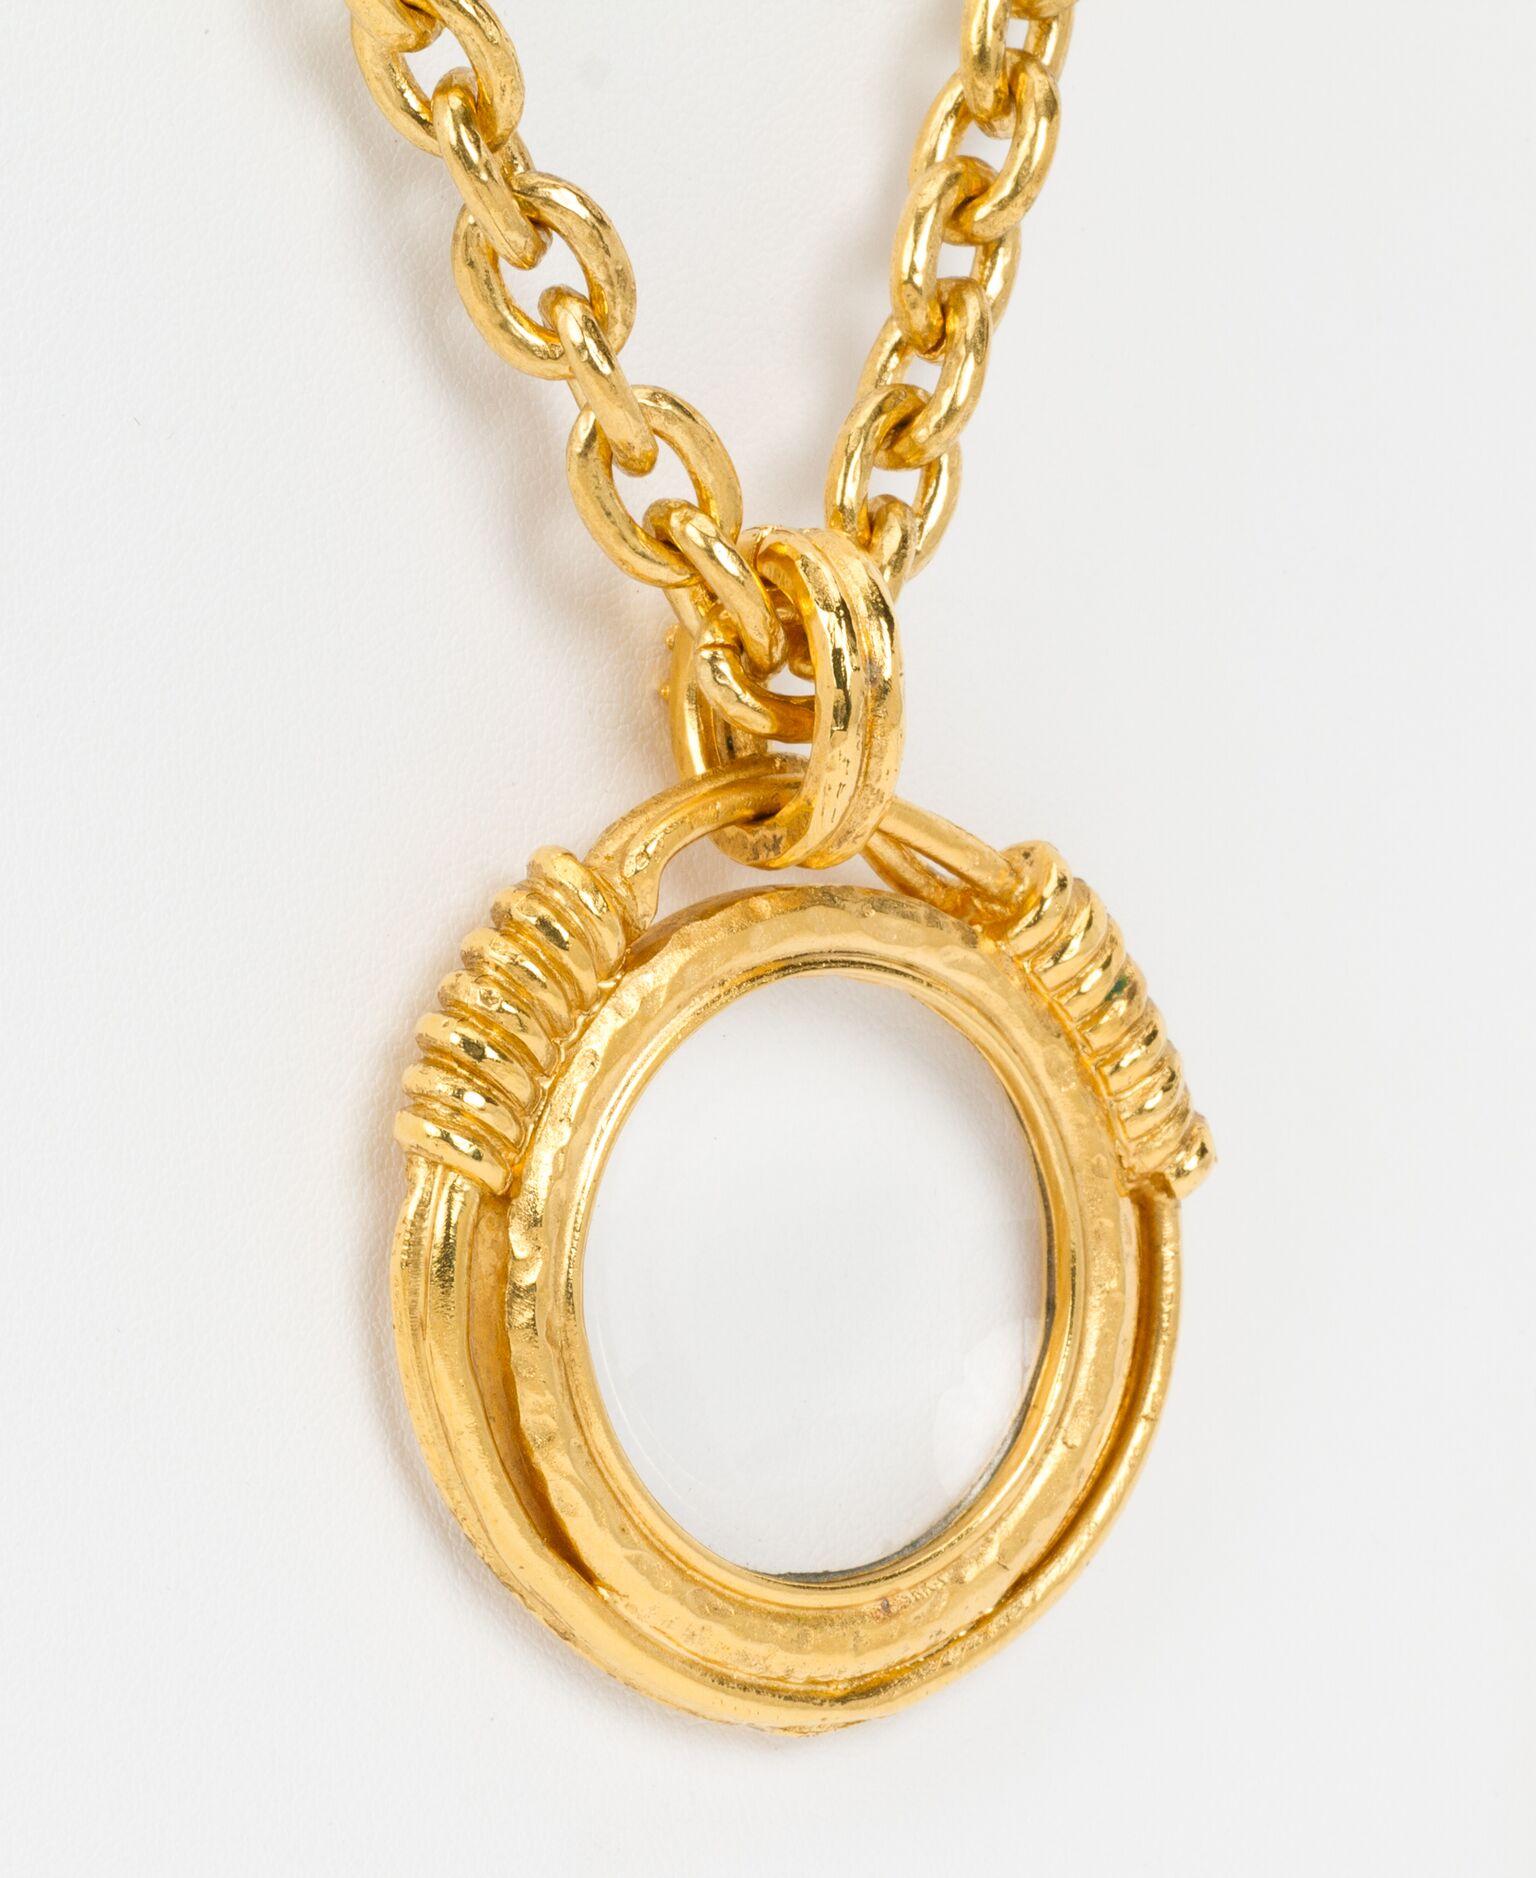 Chanel Satin Gold 80s Magnifier Necklace For Sale 3